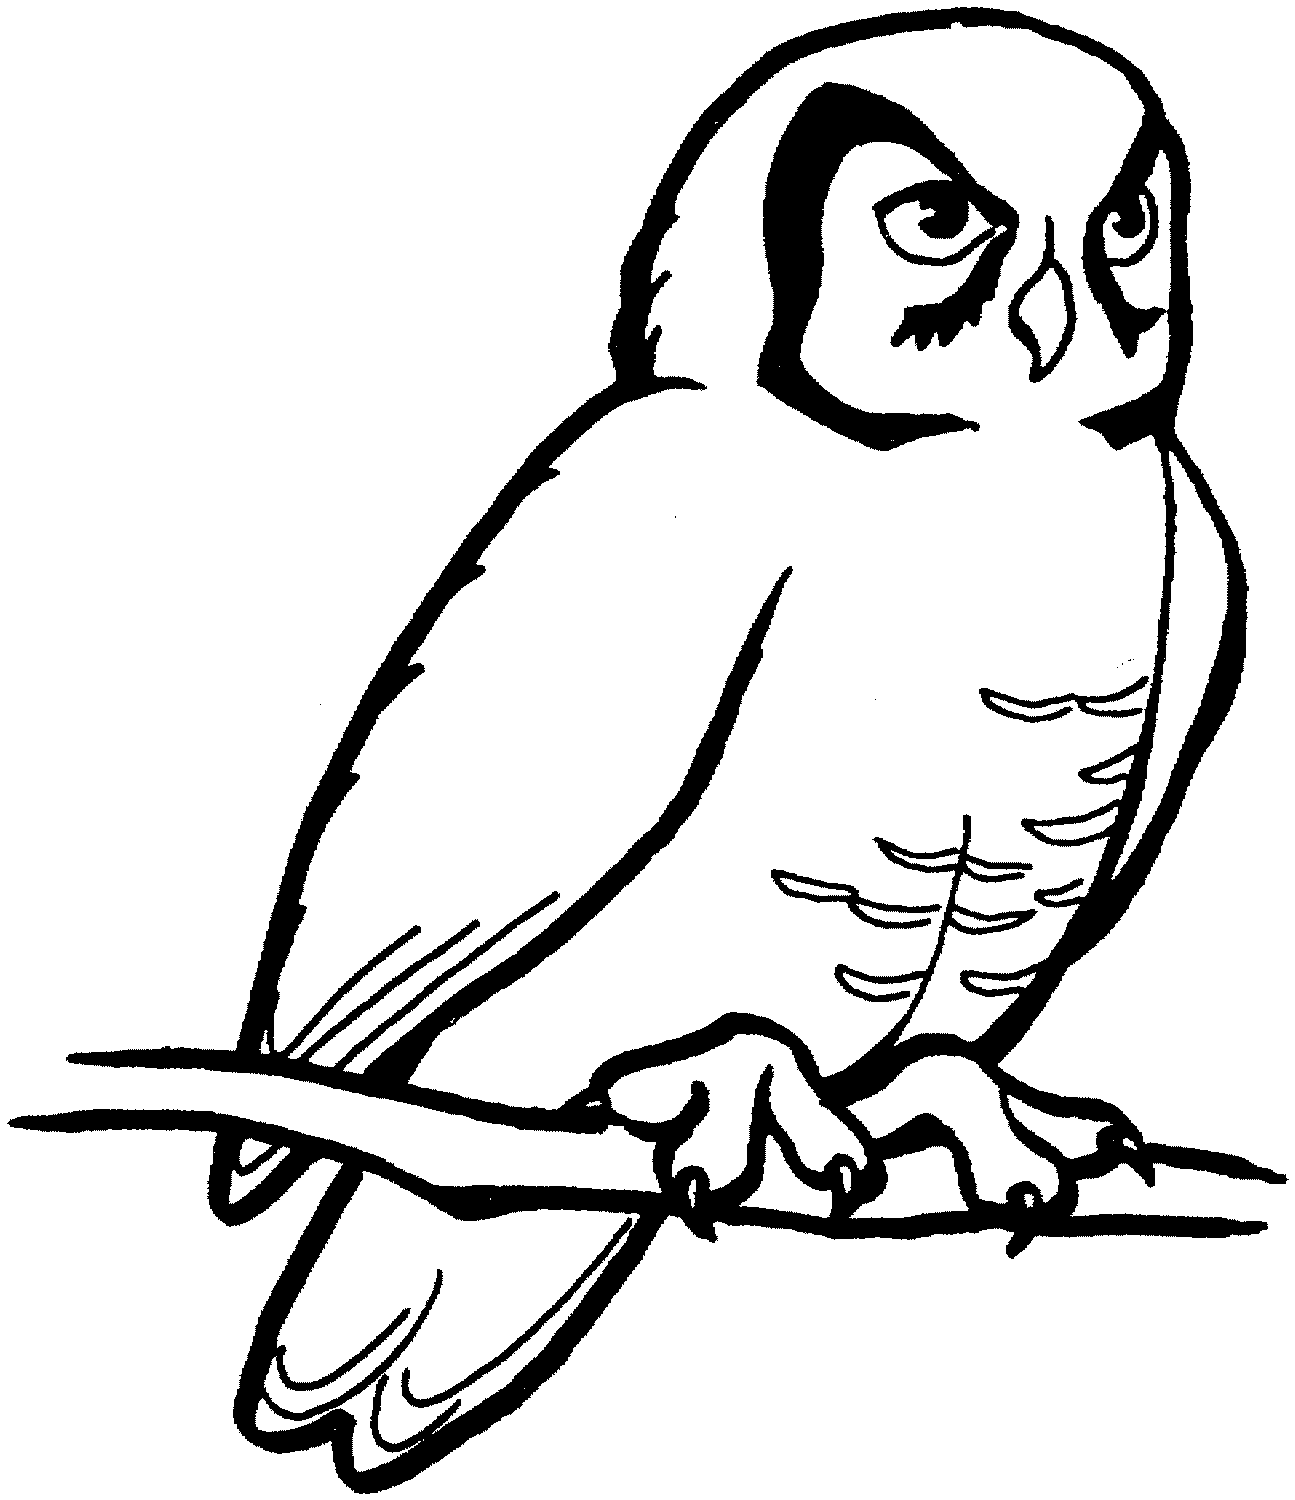 perched barn owl coloring id 94193 : Uncategorized - yoand.